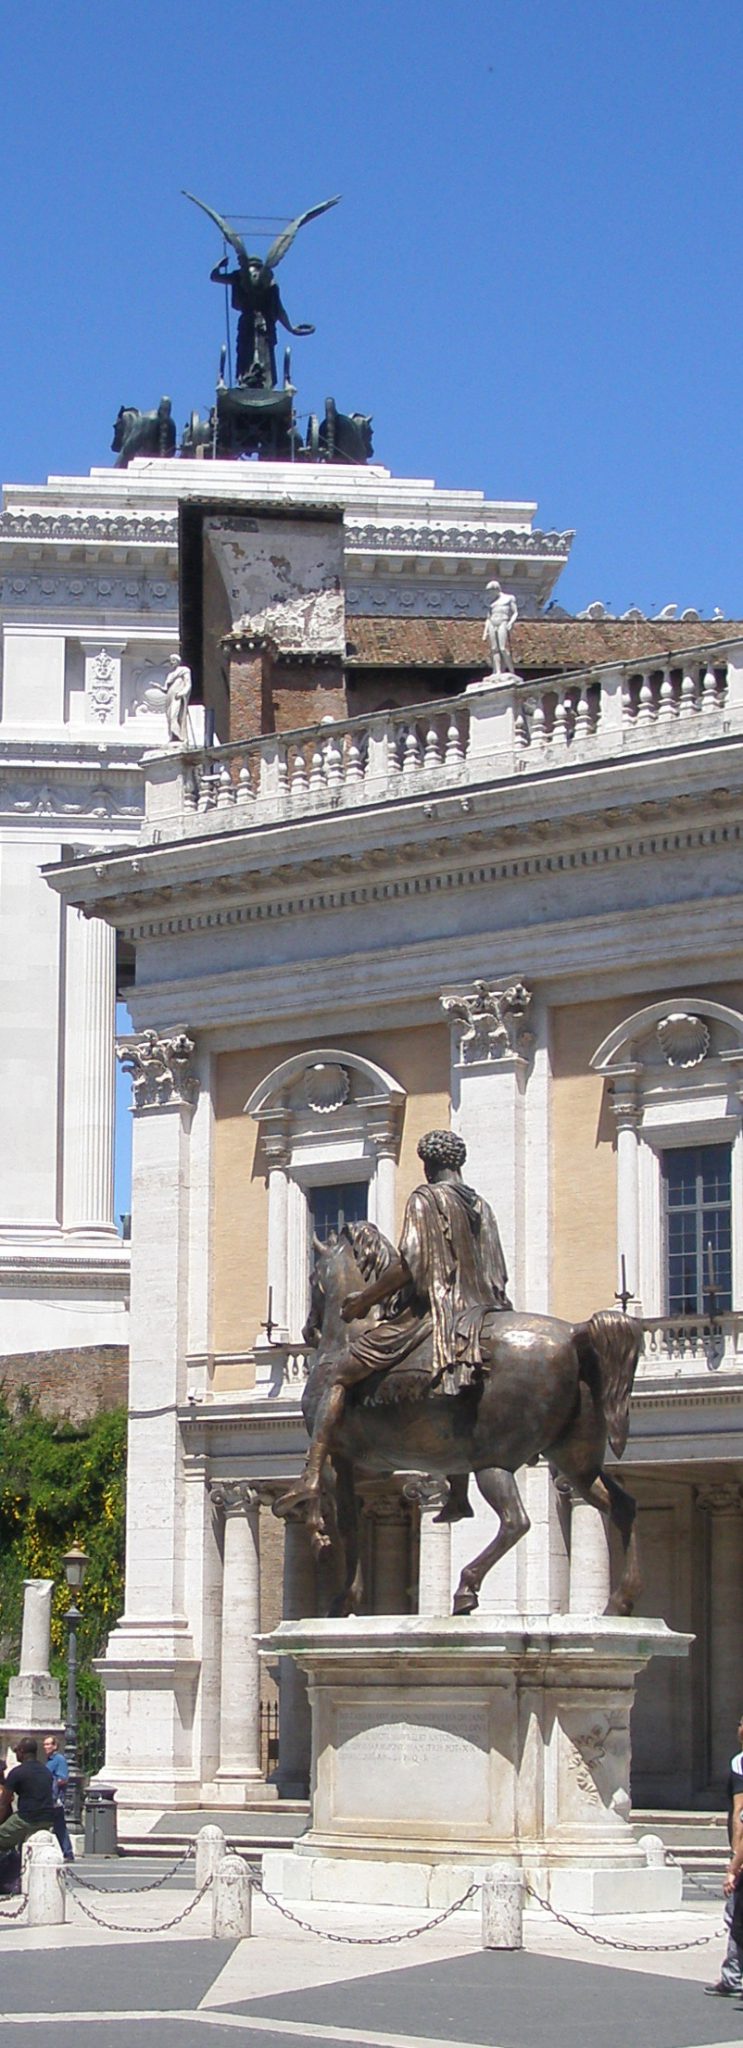 The reproduction of Marcus Aurelius in the foreground, with one of Il Vittoriano's giant, winged statues overhead.